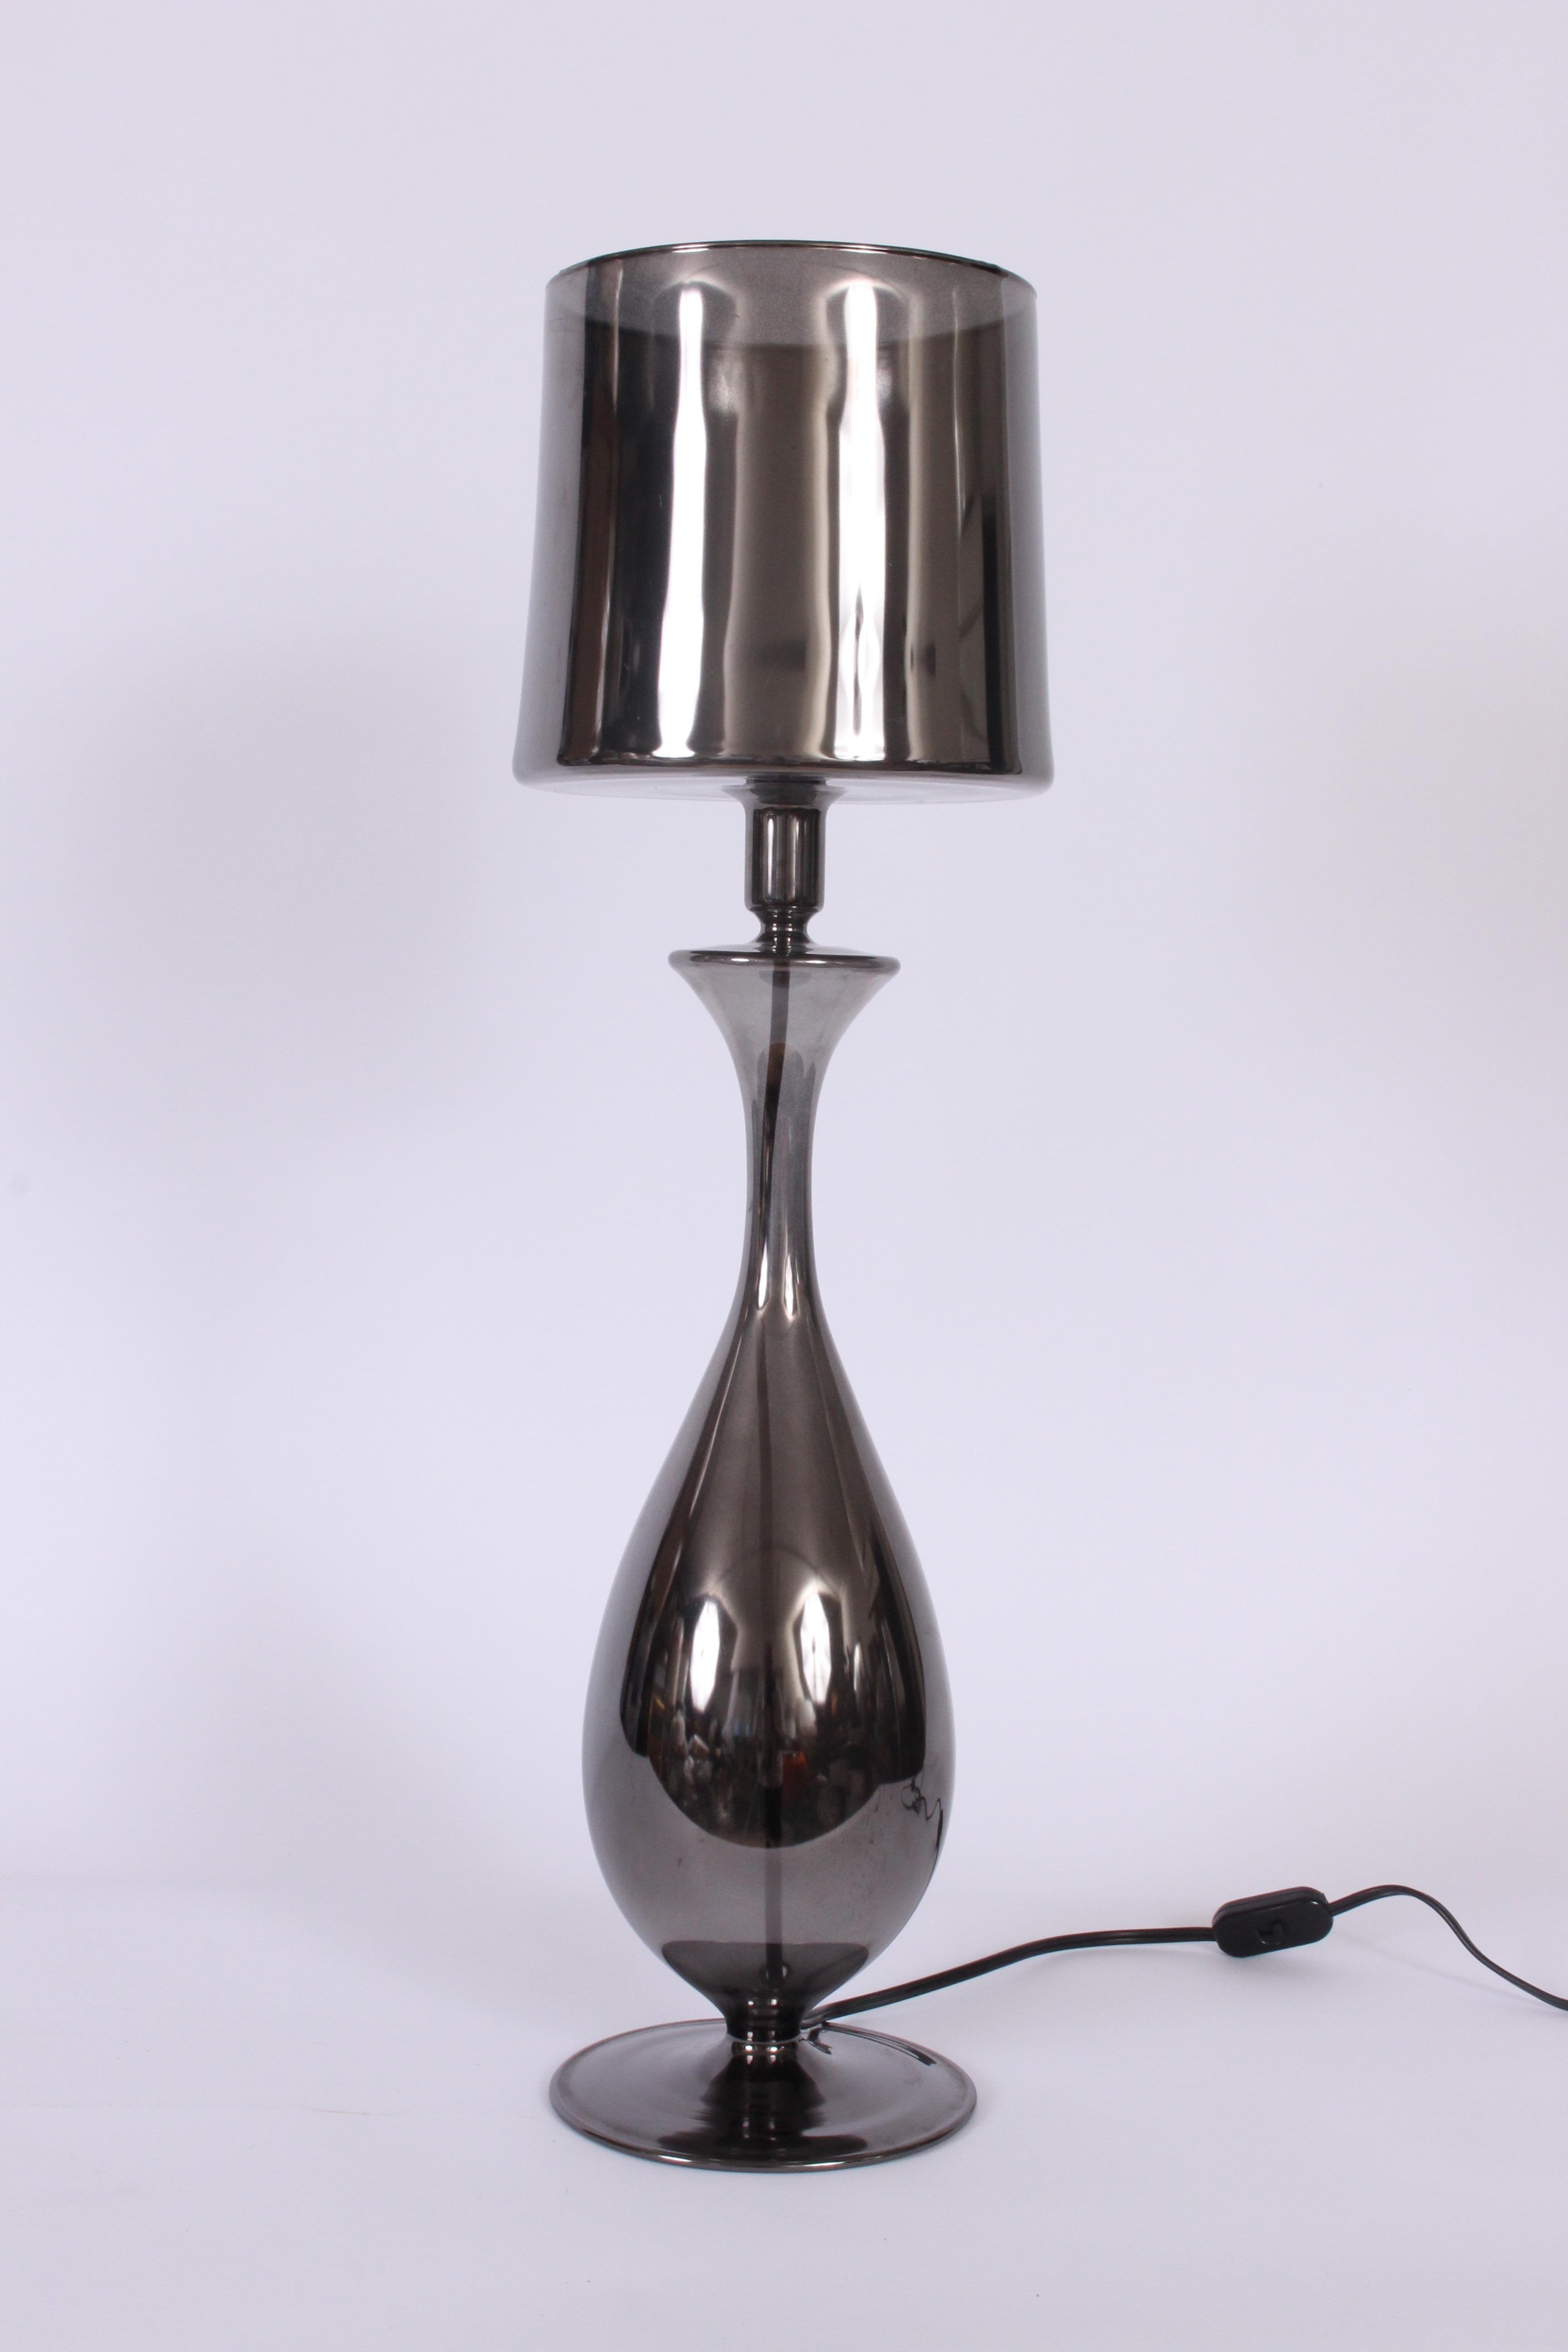 Tall Les Heritiers Pierre Dubois and Aimé-Cécil Noury designed Goutte Translucent Dark Grey All Glass Table Lamp, circa 1993. One-piece. With 8D Shade. Candelabra socket. Cord switch. French Art Glass. Slim. Small footprint. With affixed label to